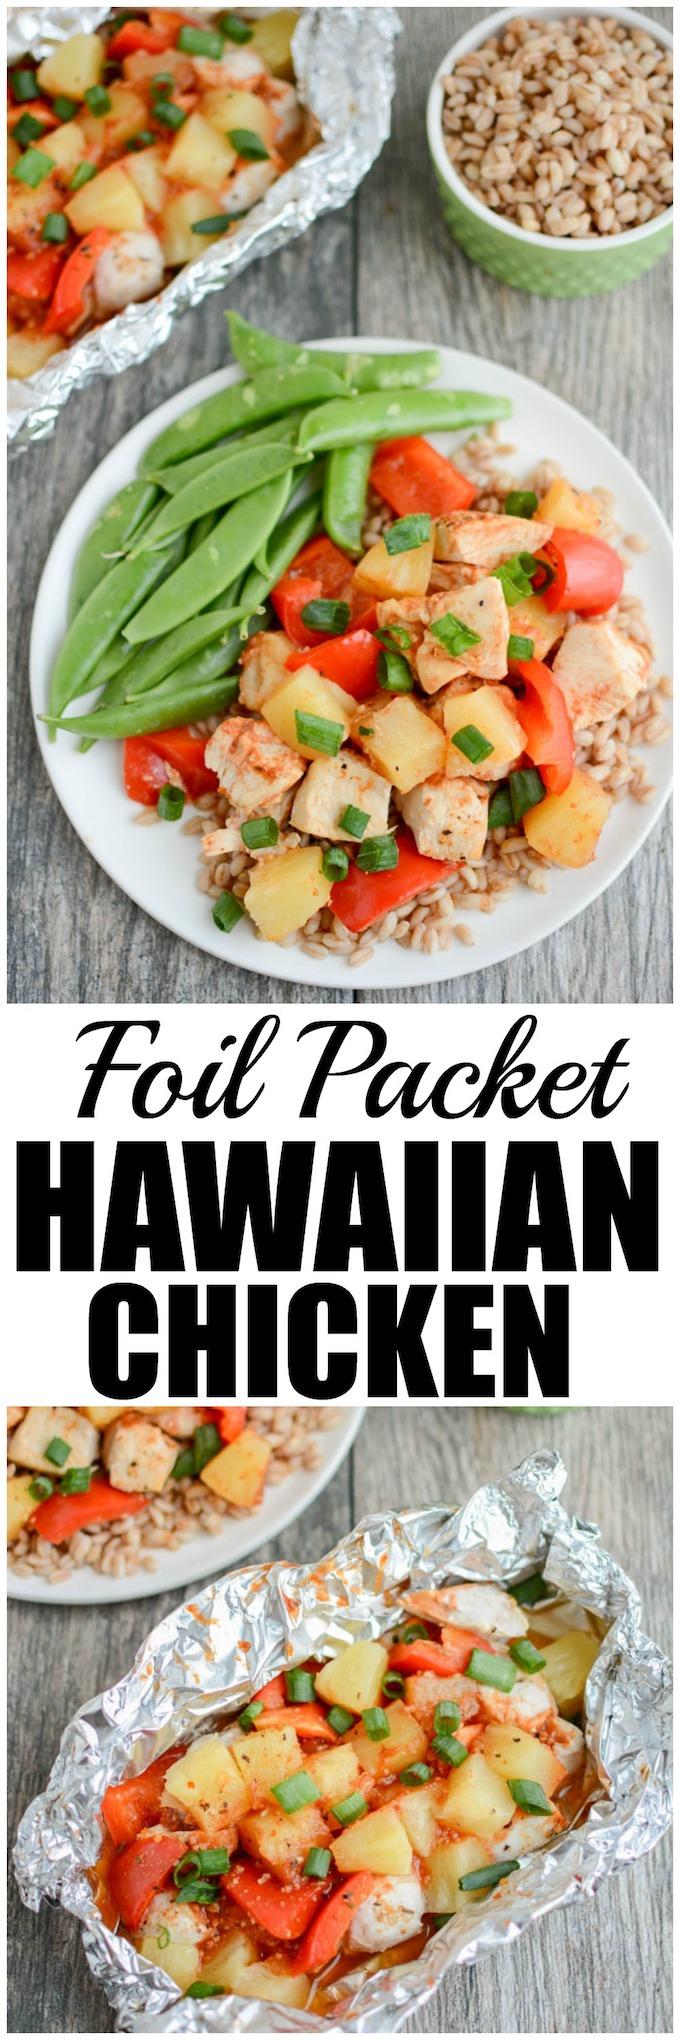 {AD} This Grilled Foil Packet Hawaiian Chicken Recipe is perfect for summer. Assemble the packets quickly, toss them on the grill and dinner is served! Plus, cleanup is a breeze and the leftovers are great for lunch!